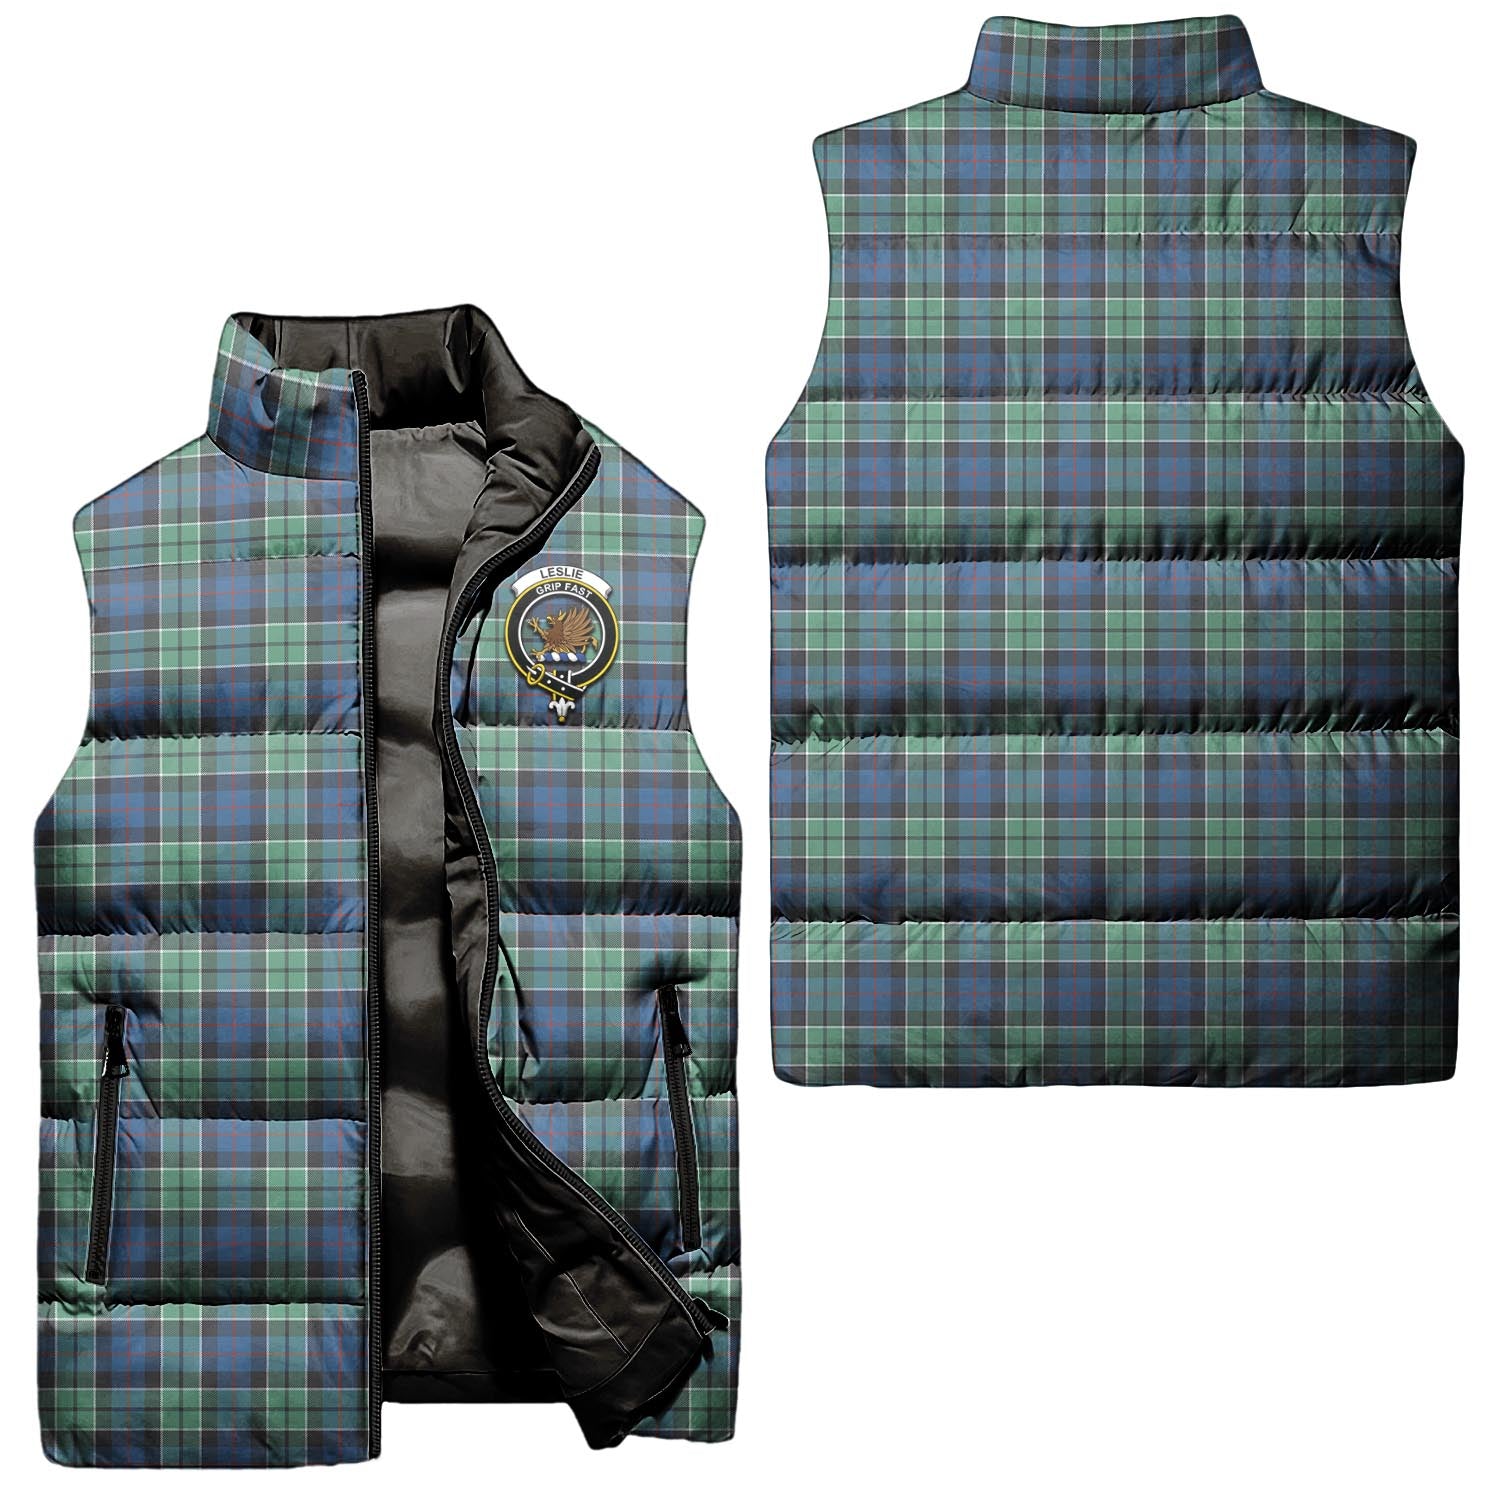 leslie-hunting-ancient-clan-puffer-vest-family-crest-plaid-sleeveless-down-jacket